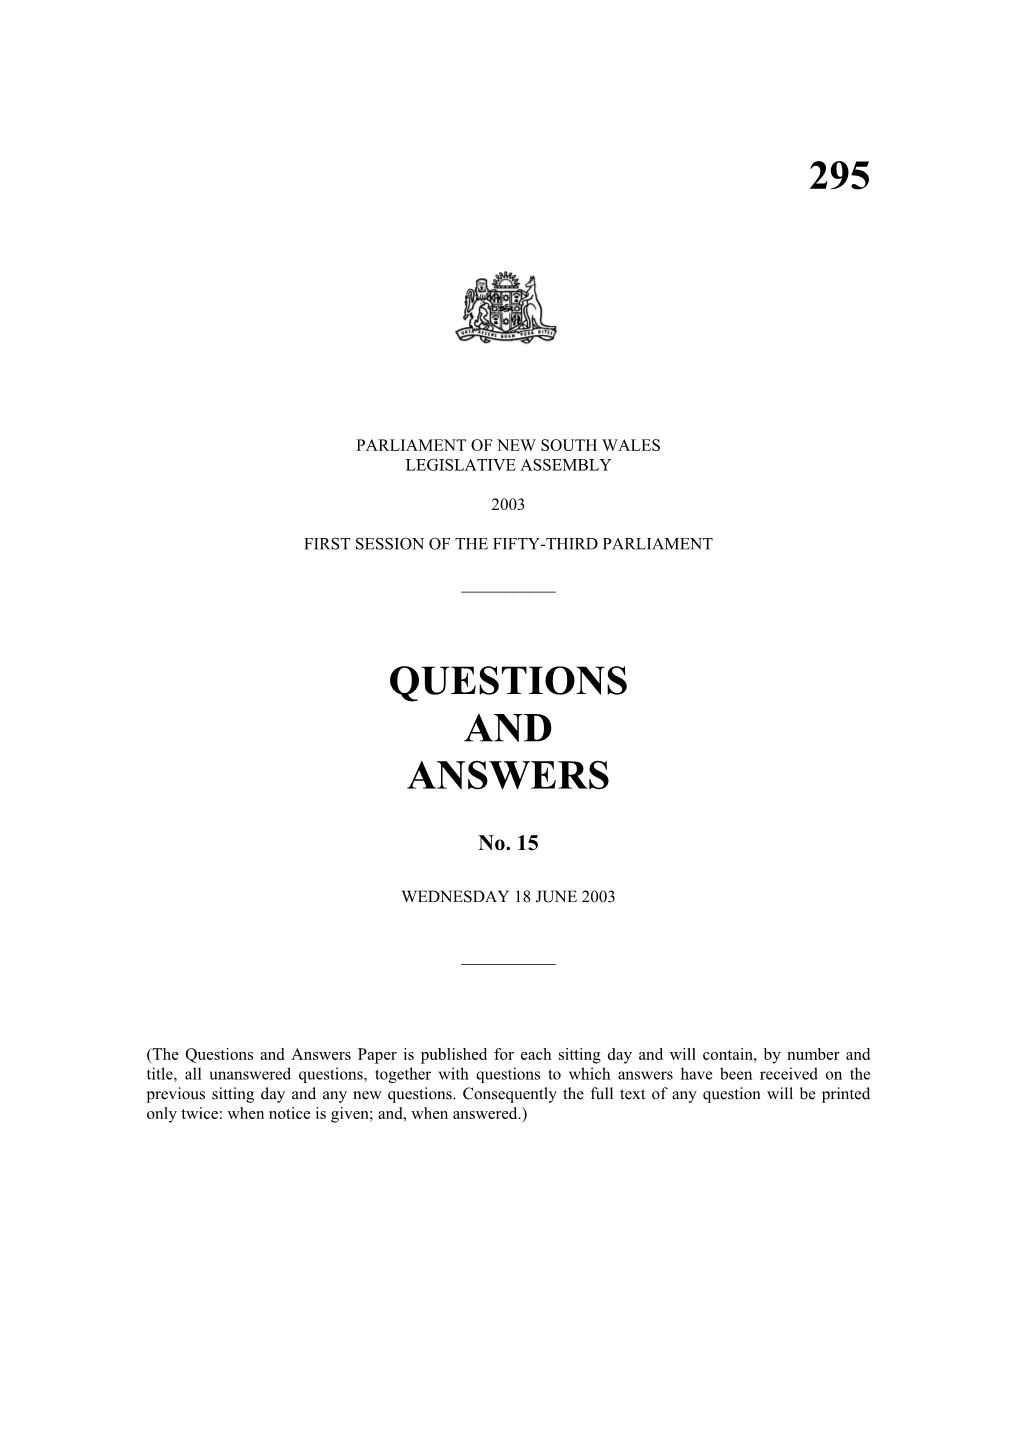 295 Questions and Answers